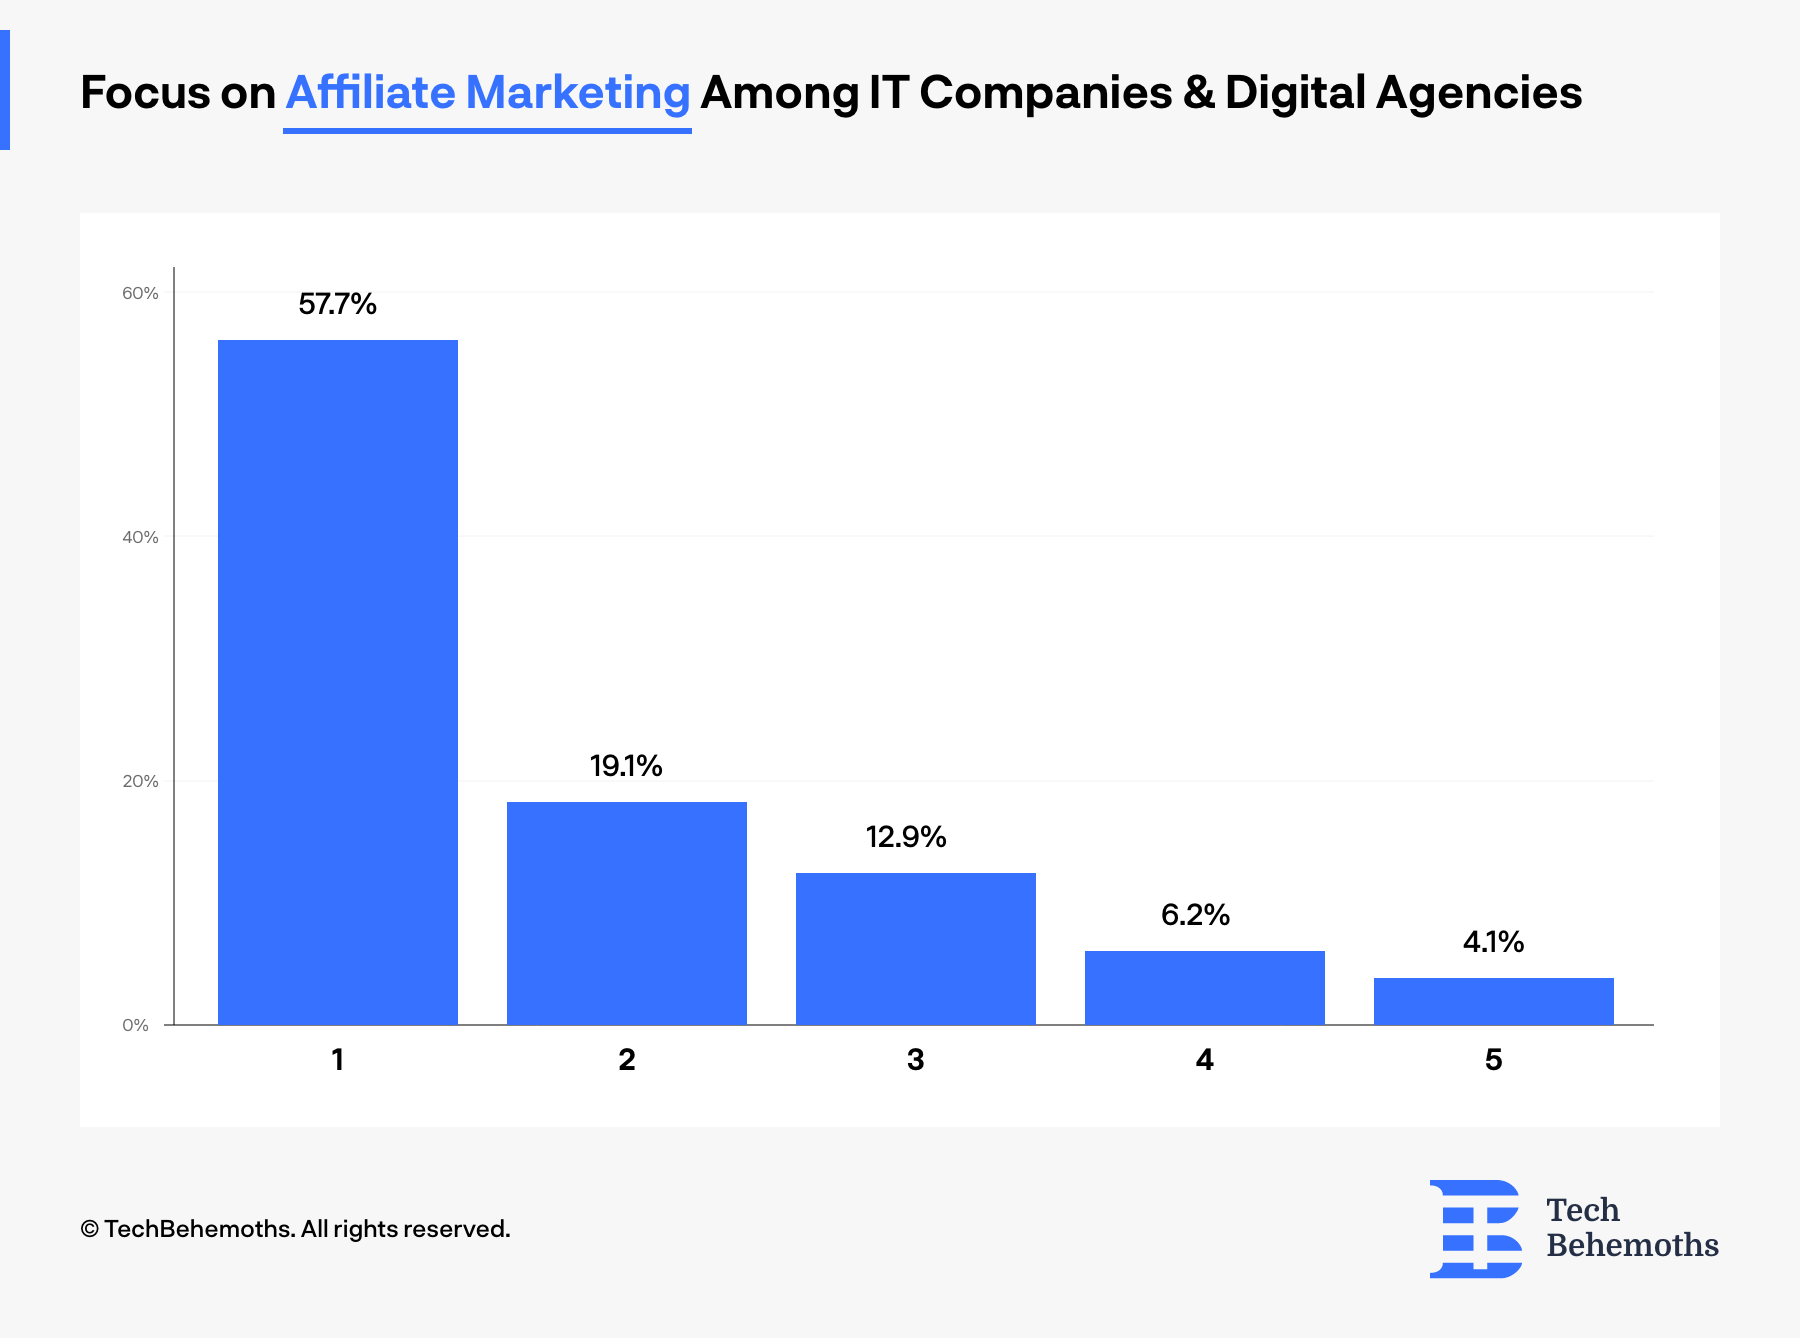 How much IT companies and digital agencies focus on affiliate marketing - survey results